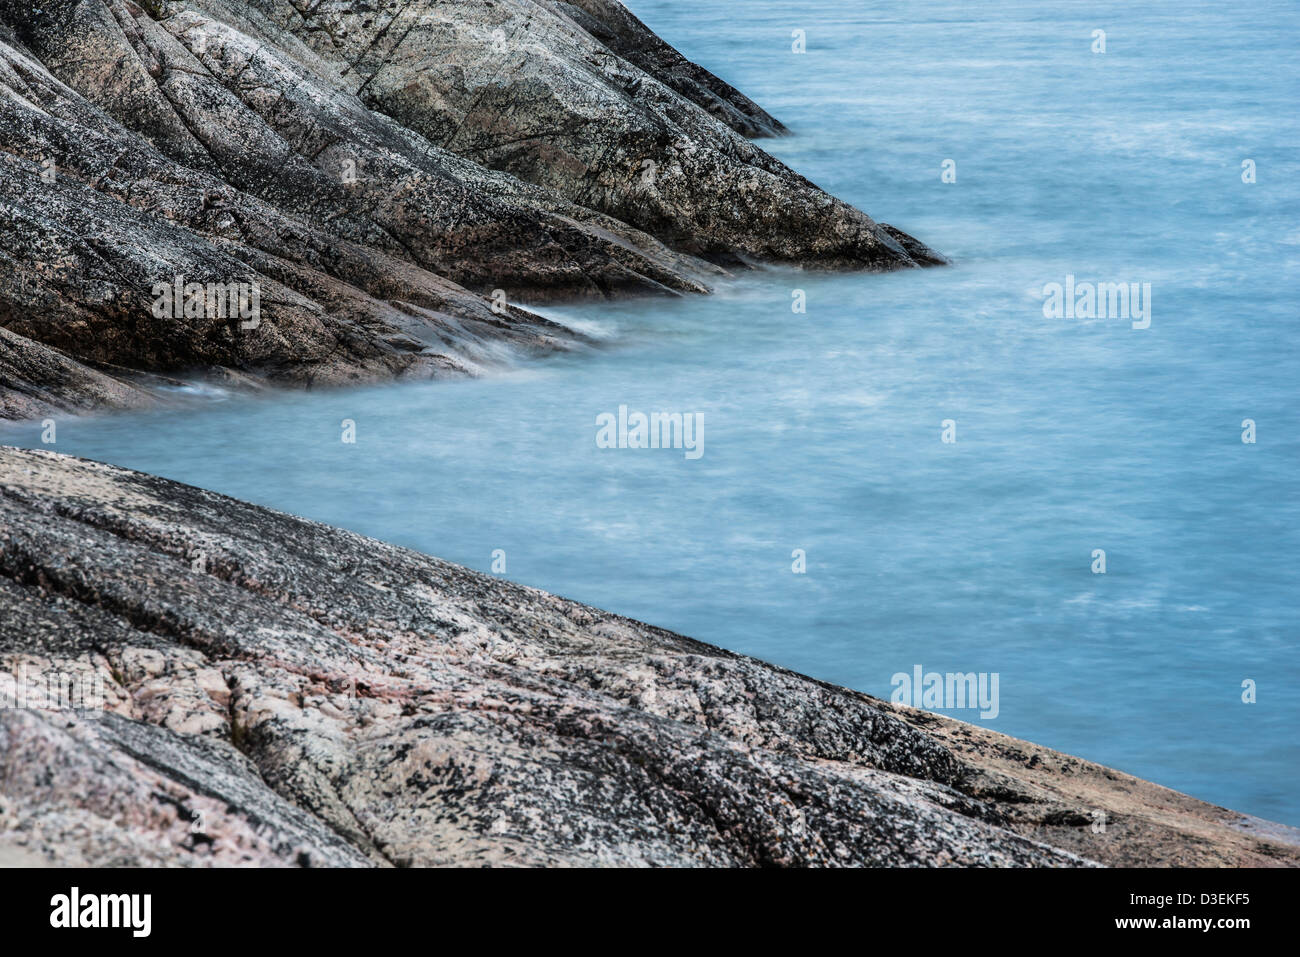 Tranquil scene of rocks and water in the Stockholm archipelago, Sweden Stock Photo